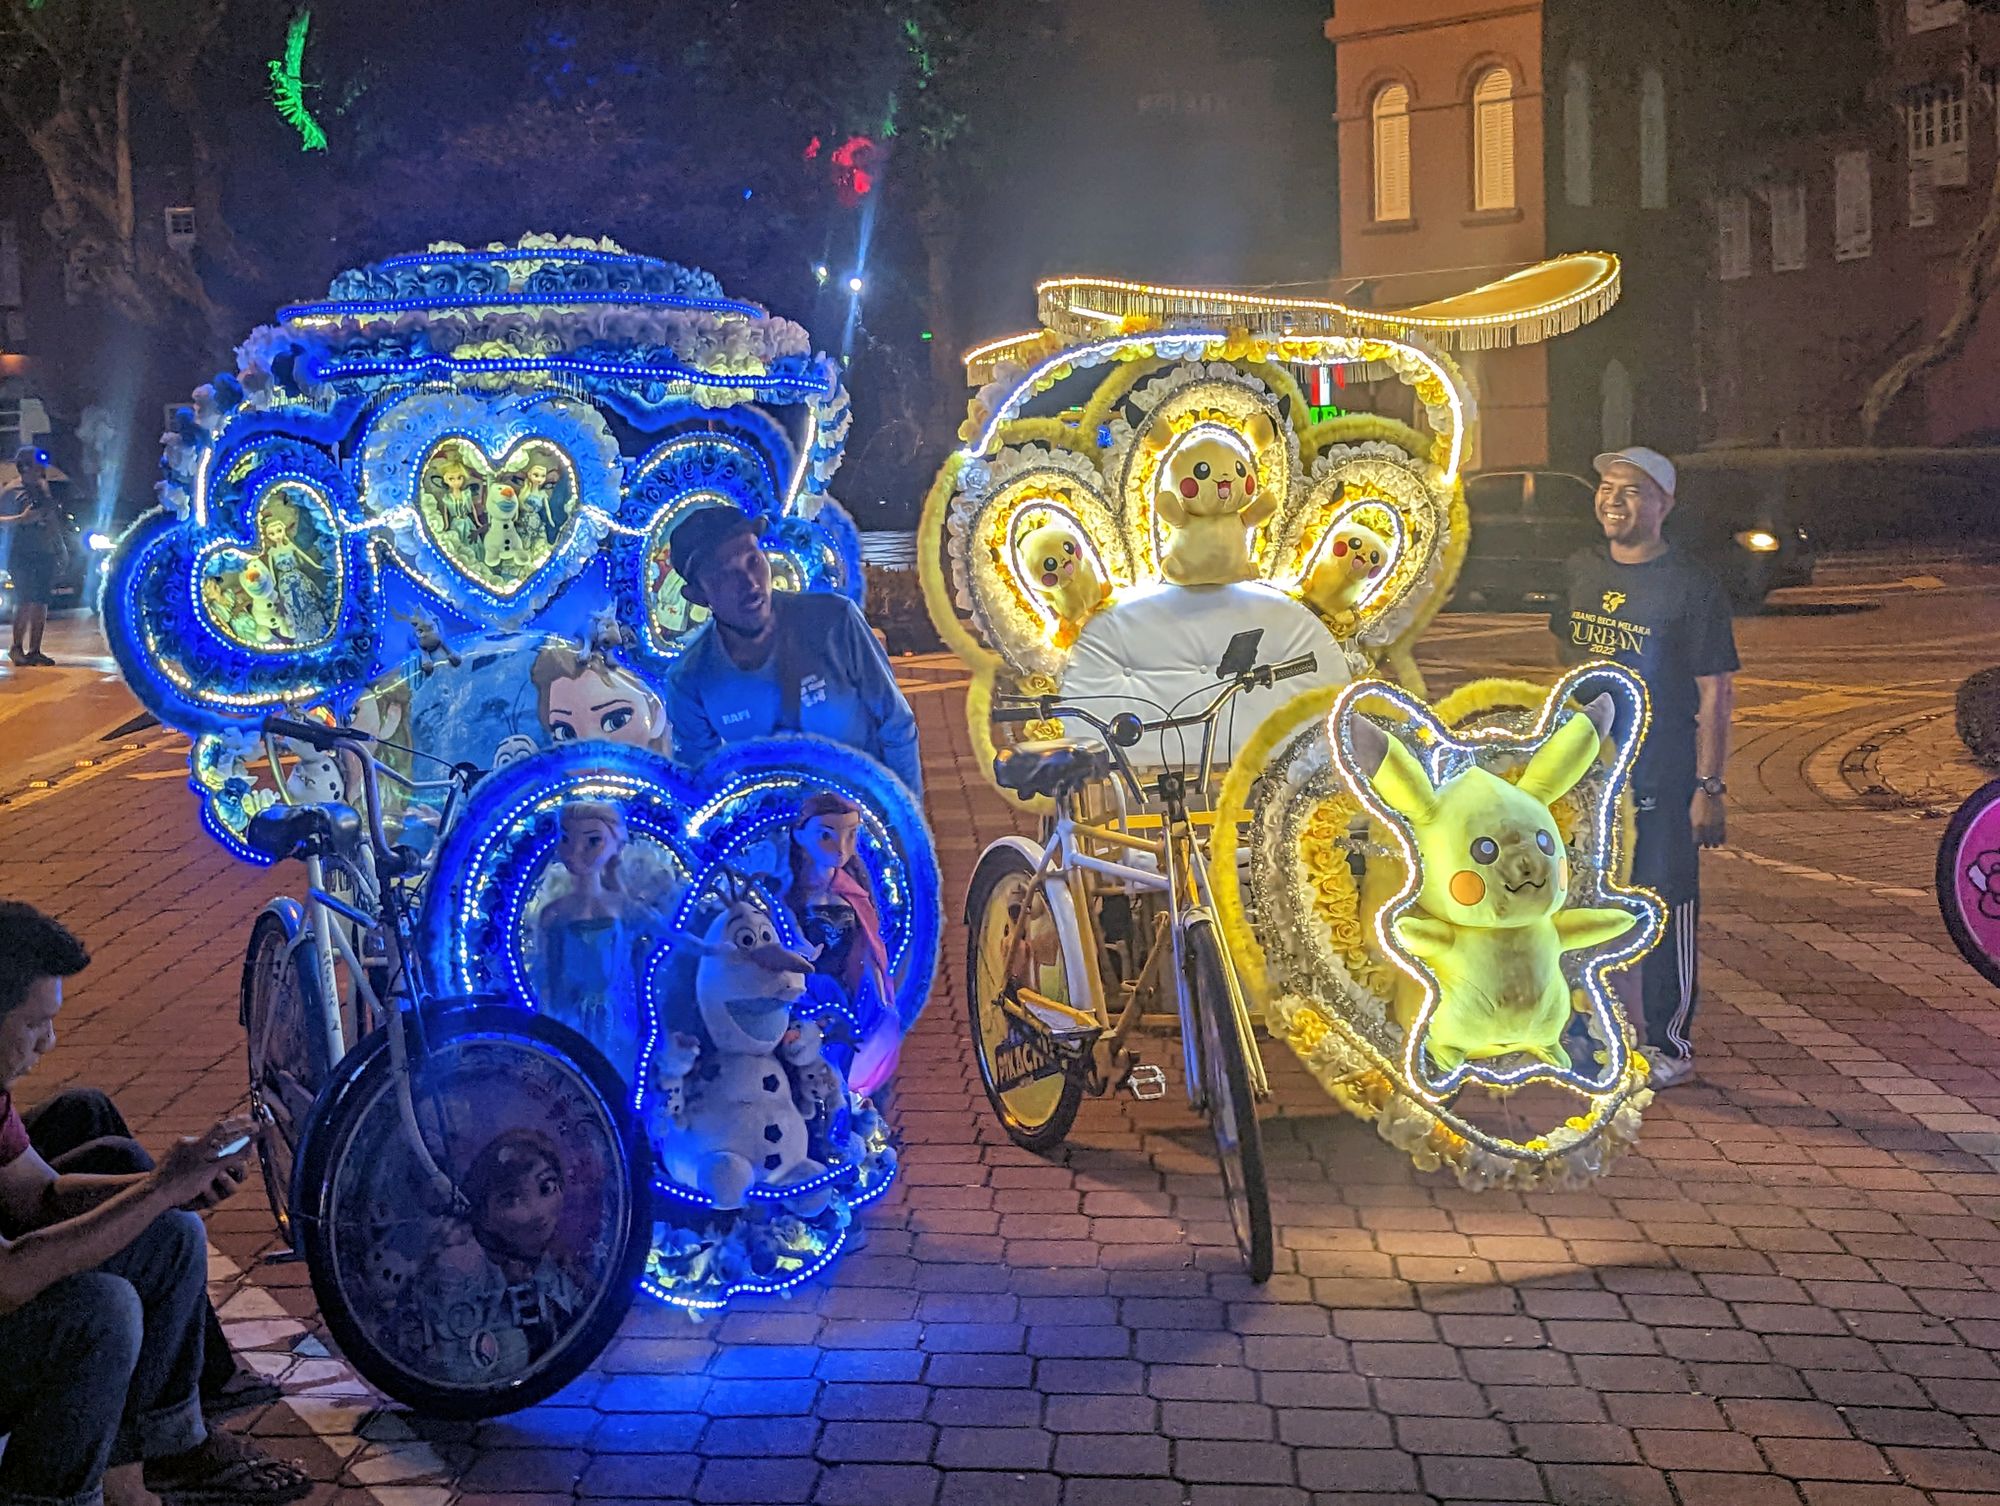 Two heavily decorated rickshaws on the street, one with Frozen move paraphernalia, and the other with Pikachu themed.